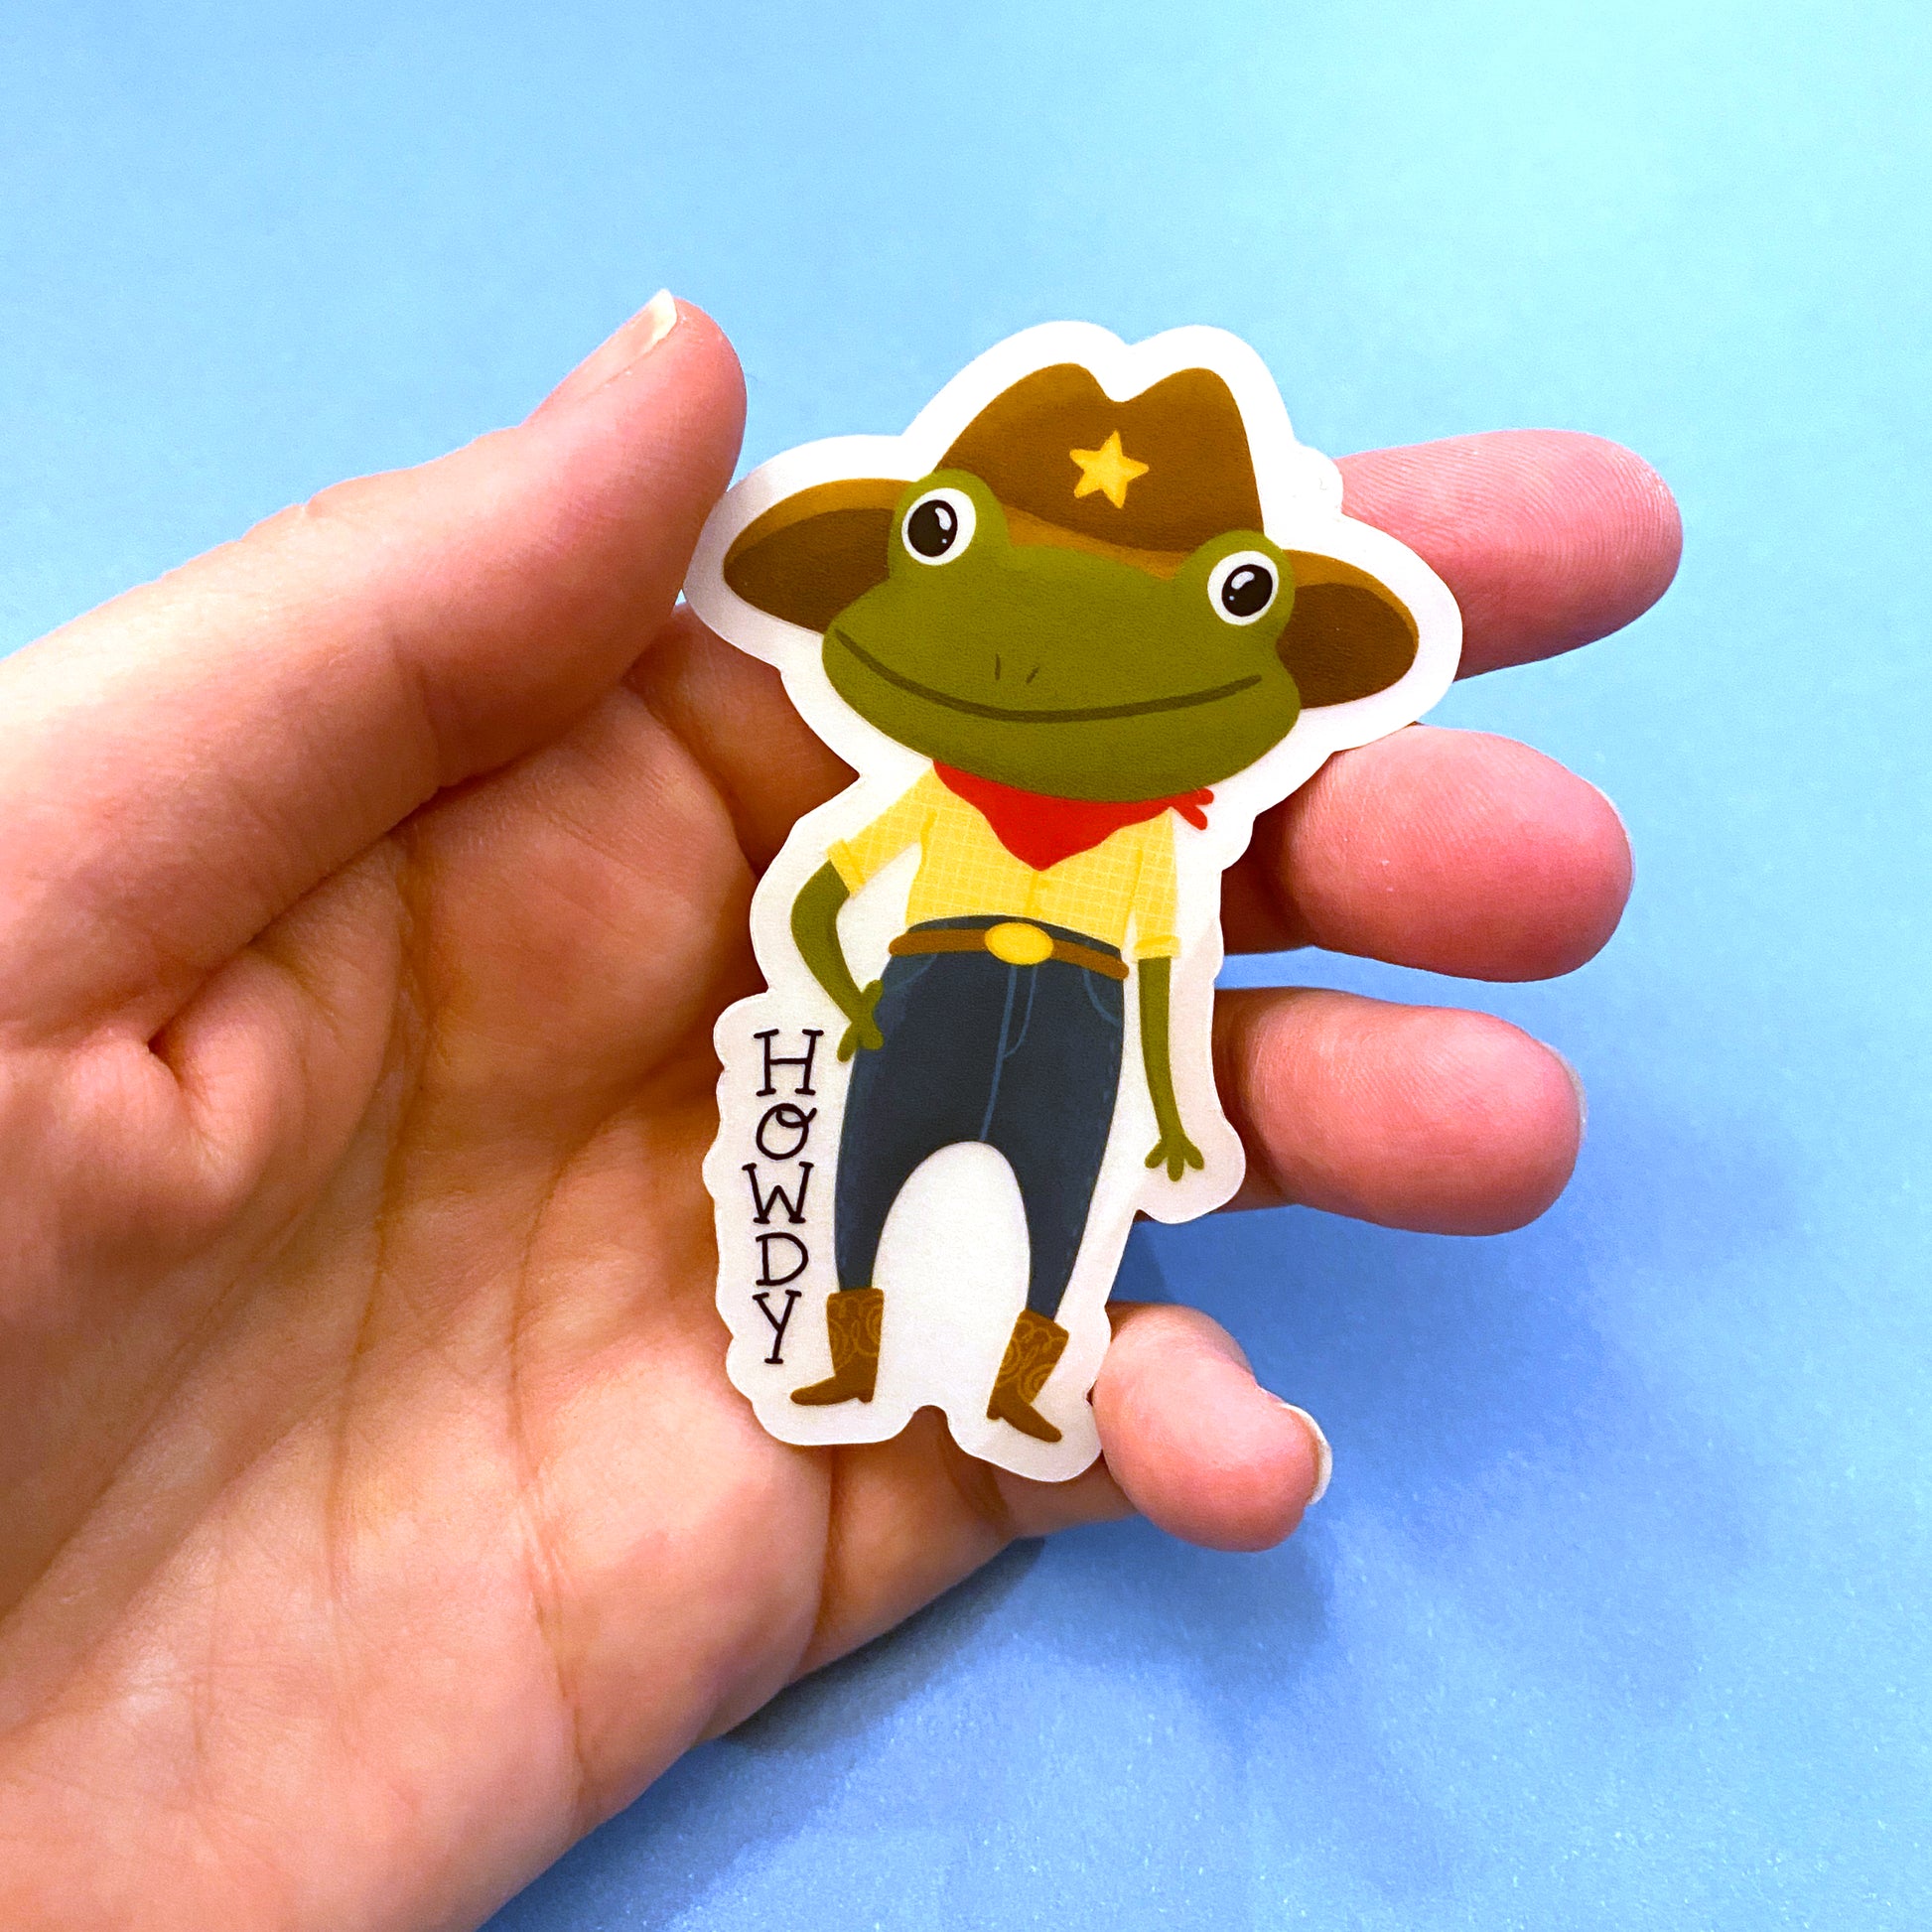 Transparent vinyl sticker featuring an adorable cowboy frog. HOWDY!  Oringial design by Anna Fox. Waterproof, Dishwasher safe and scratchproof sticker that is made to last!